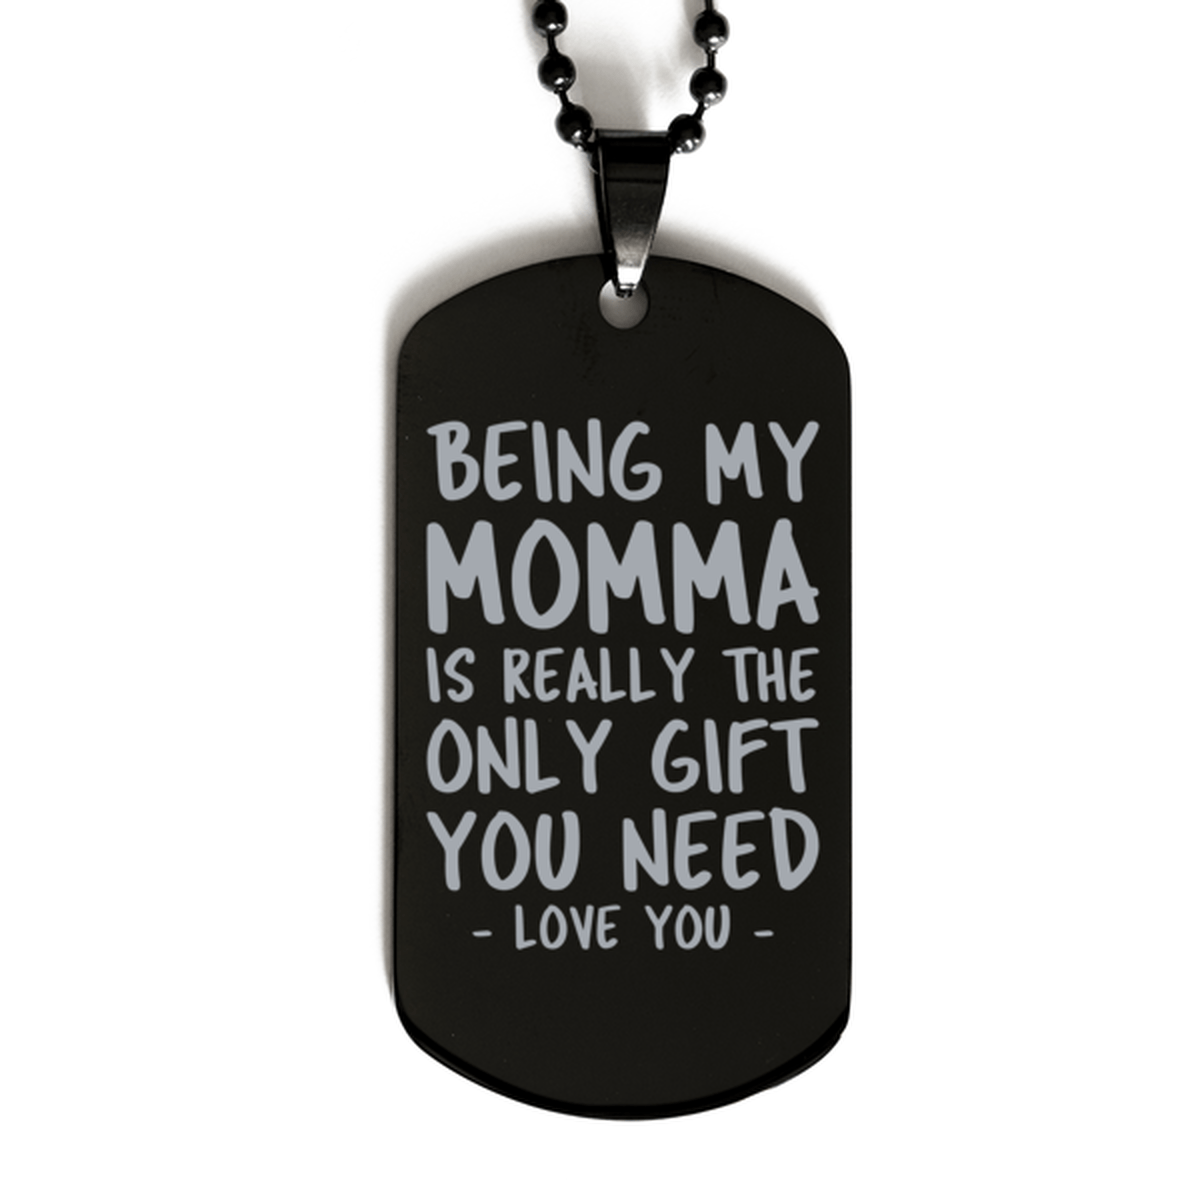 Funny Momma Black Dog Tag Necklace, Being My Momma Is Really the Only Gift You Need, Best Birthday Gifts for Momma